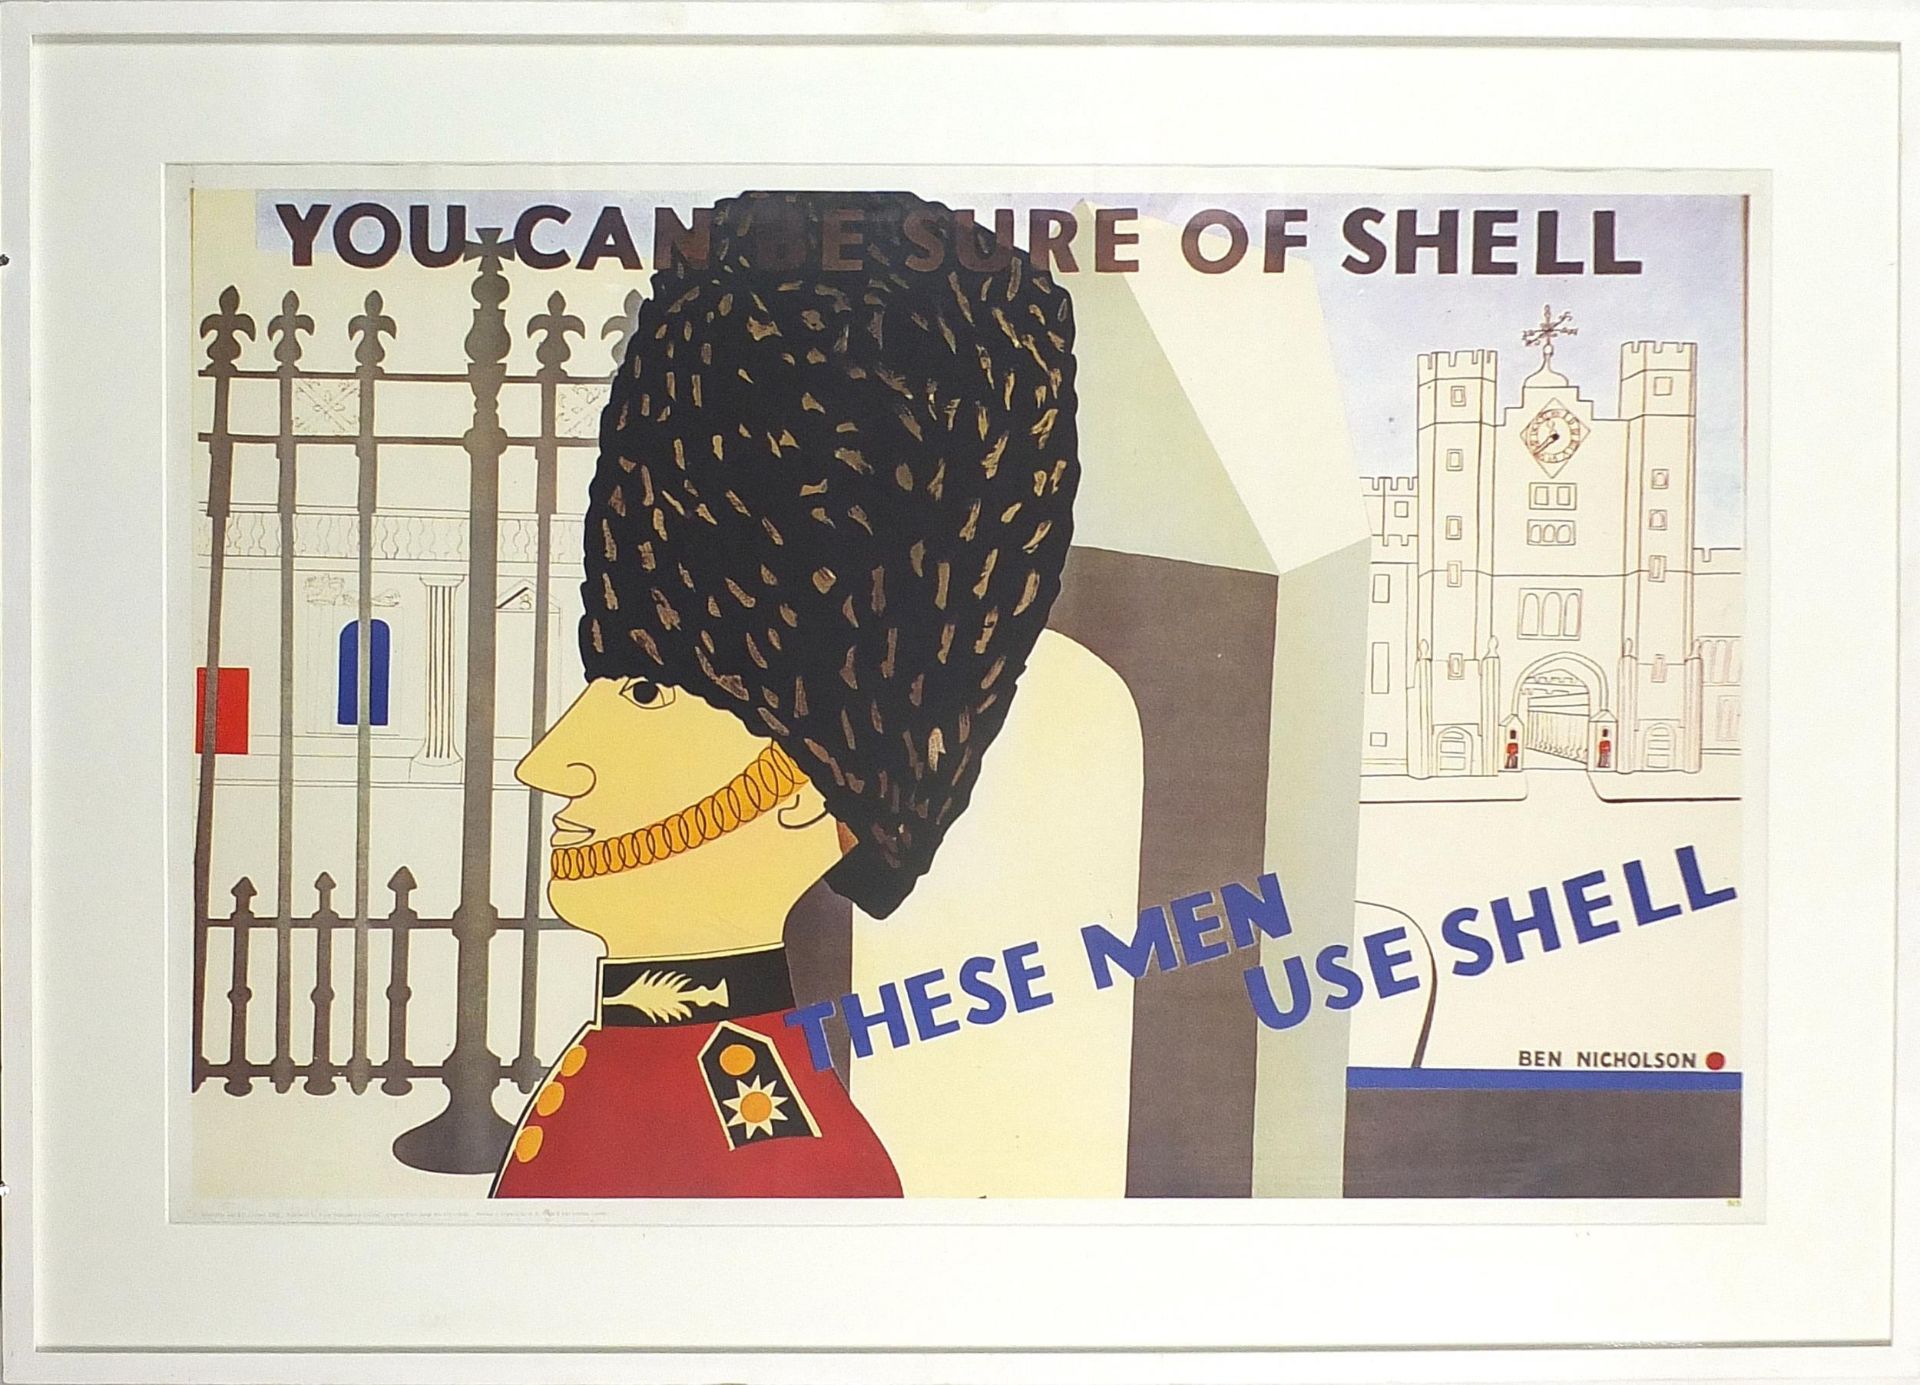 After Ben Nicholson - You Can Be Sure of Shell, 1960s lithograph, Barnard Press 1969, Belgrave St - Image 2 of 6